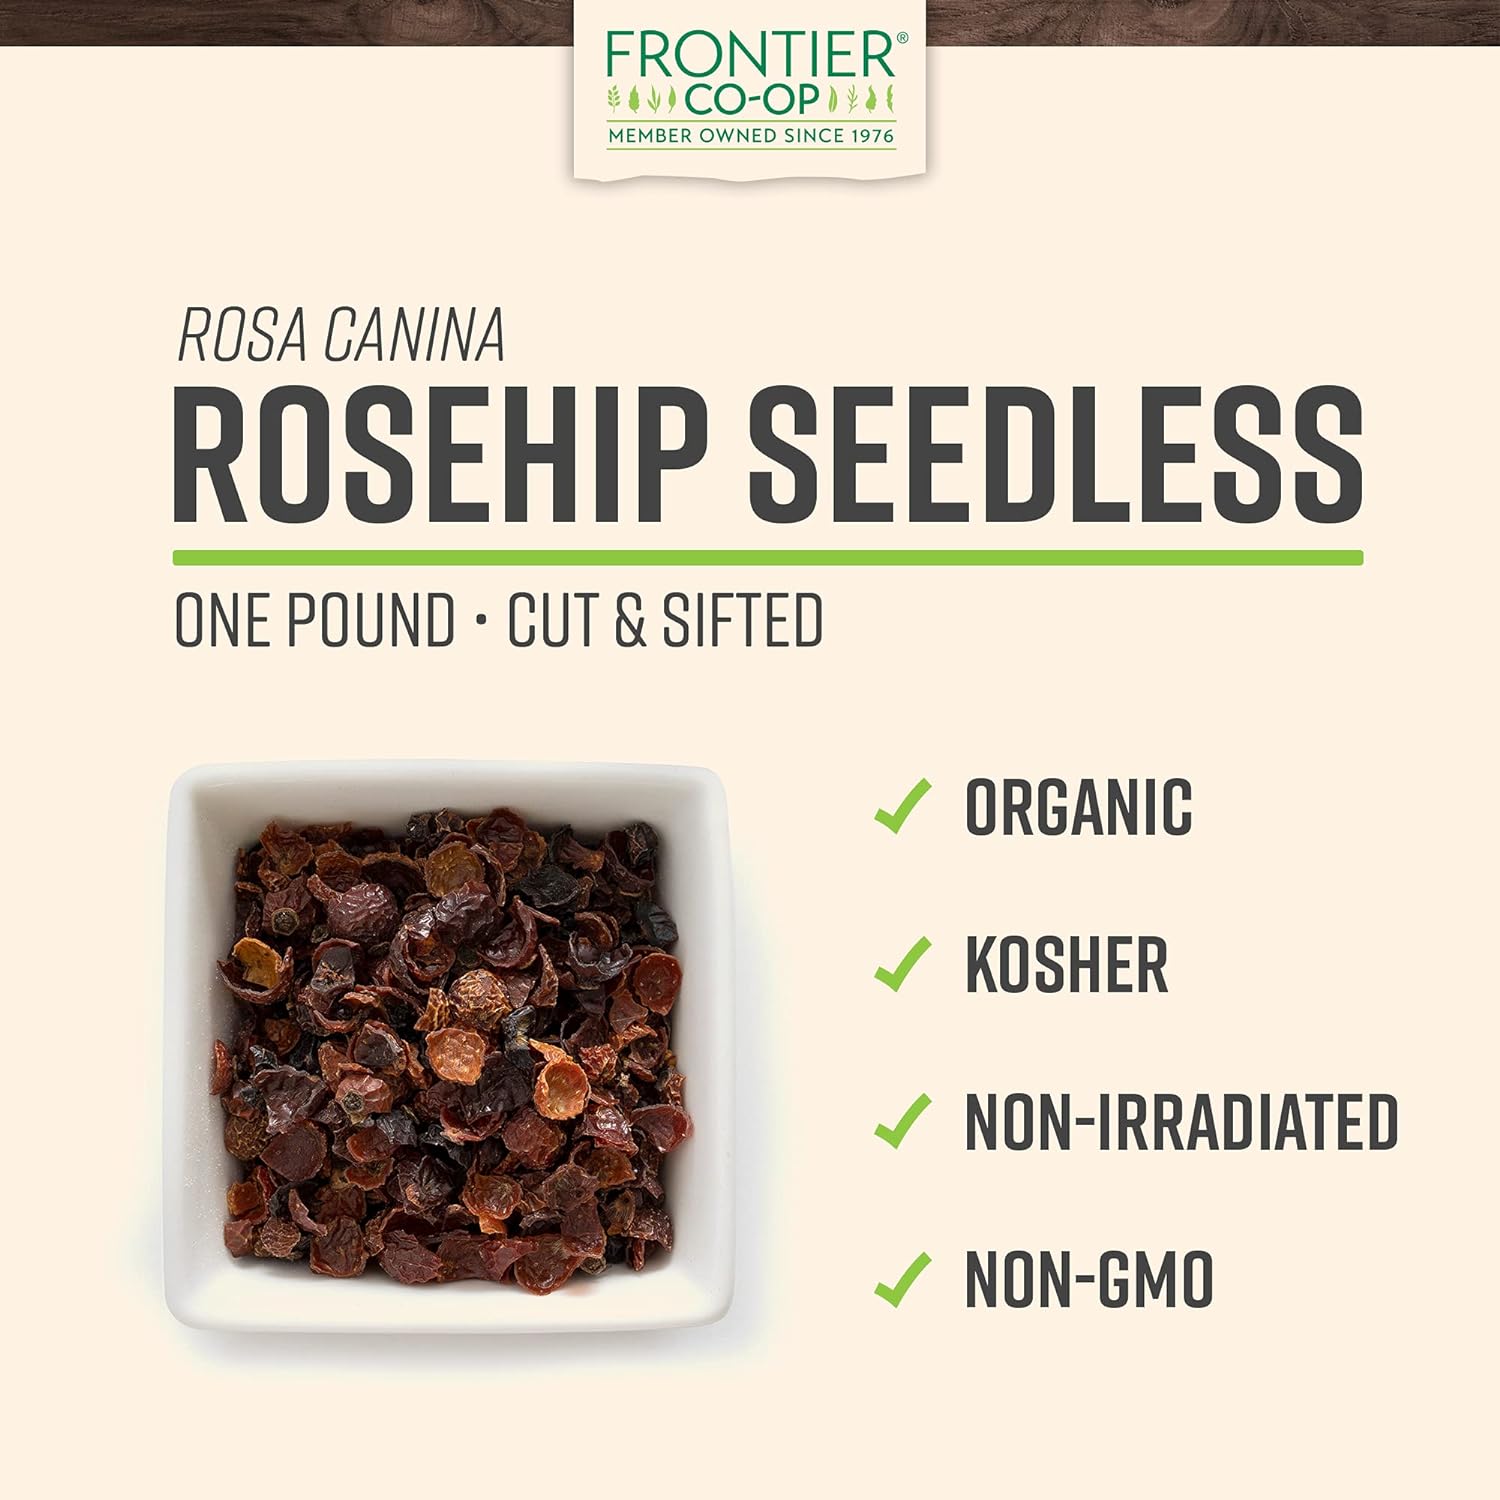 Frontier Co-op Organic Cut & Sifted Seedless Rosehips 1lb